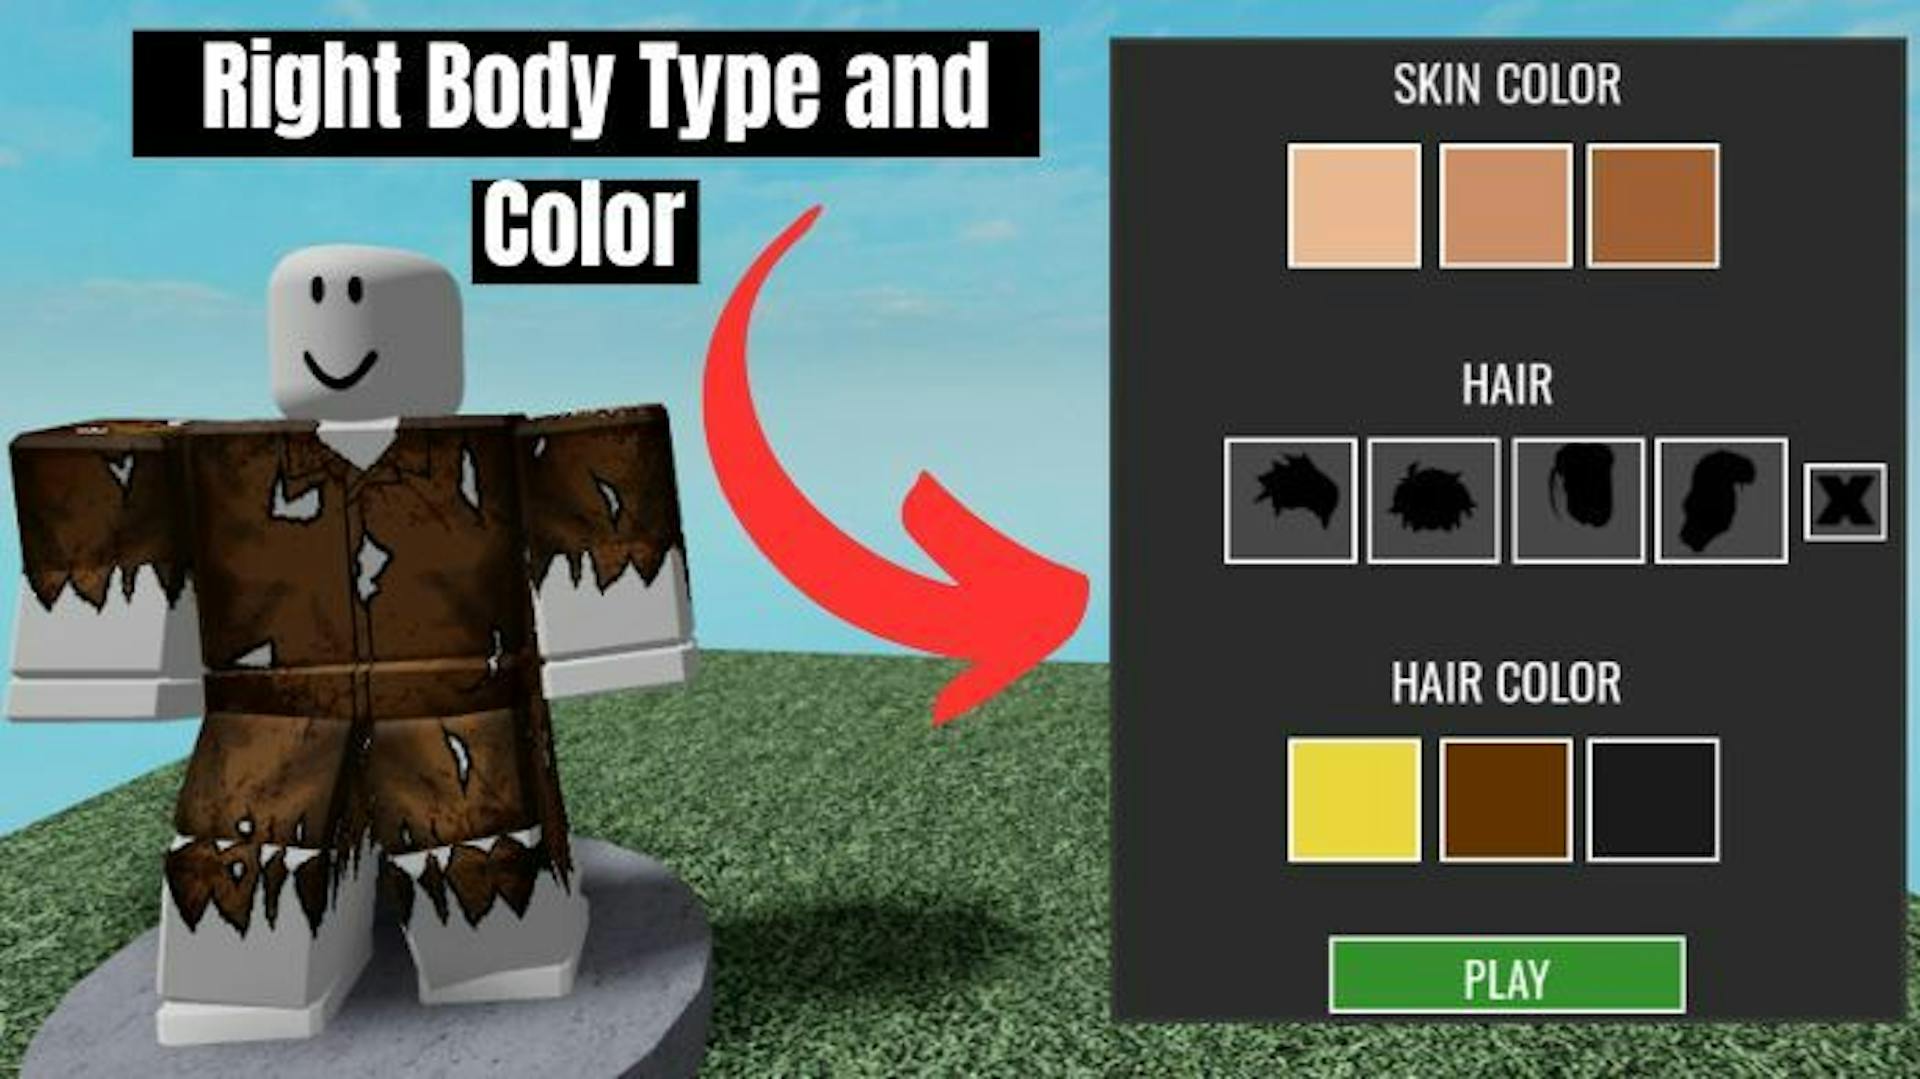 Right Body Type and Color